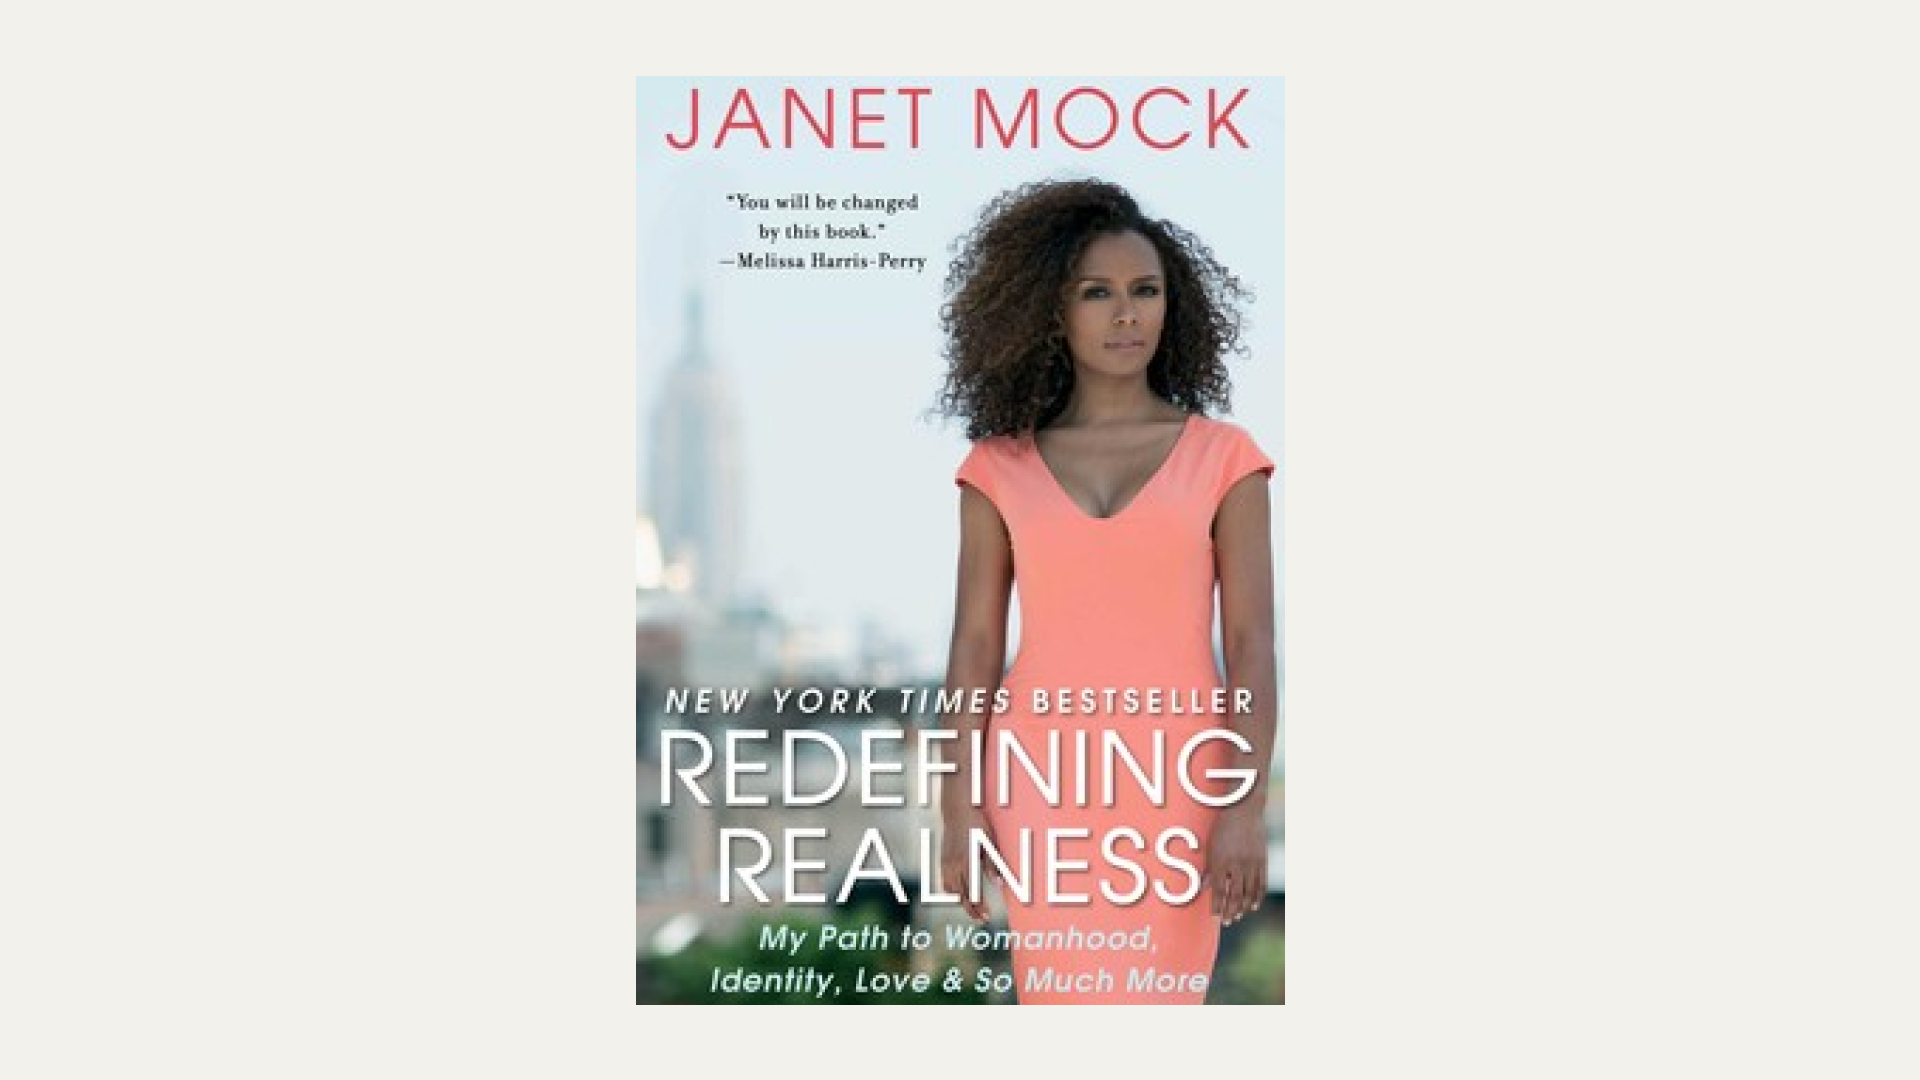 “Redefining Realness: My Path to Womanhood, Identity, Love & So Much More” by Janet Mock 